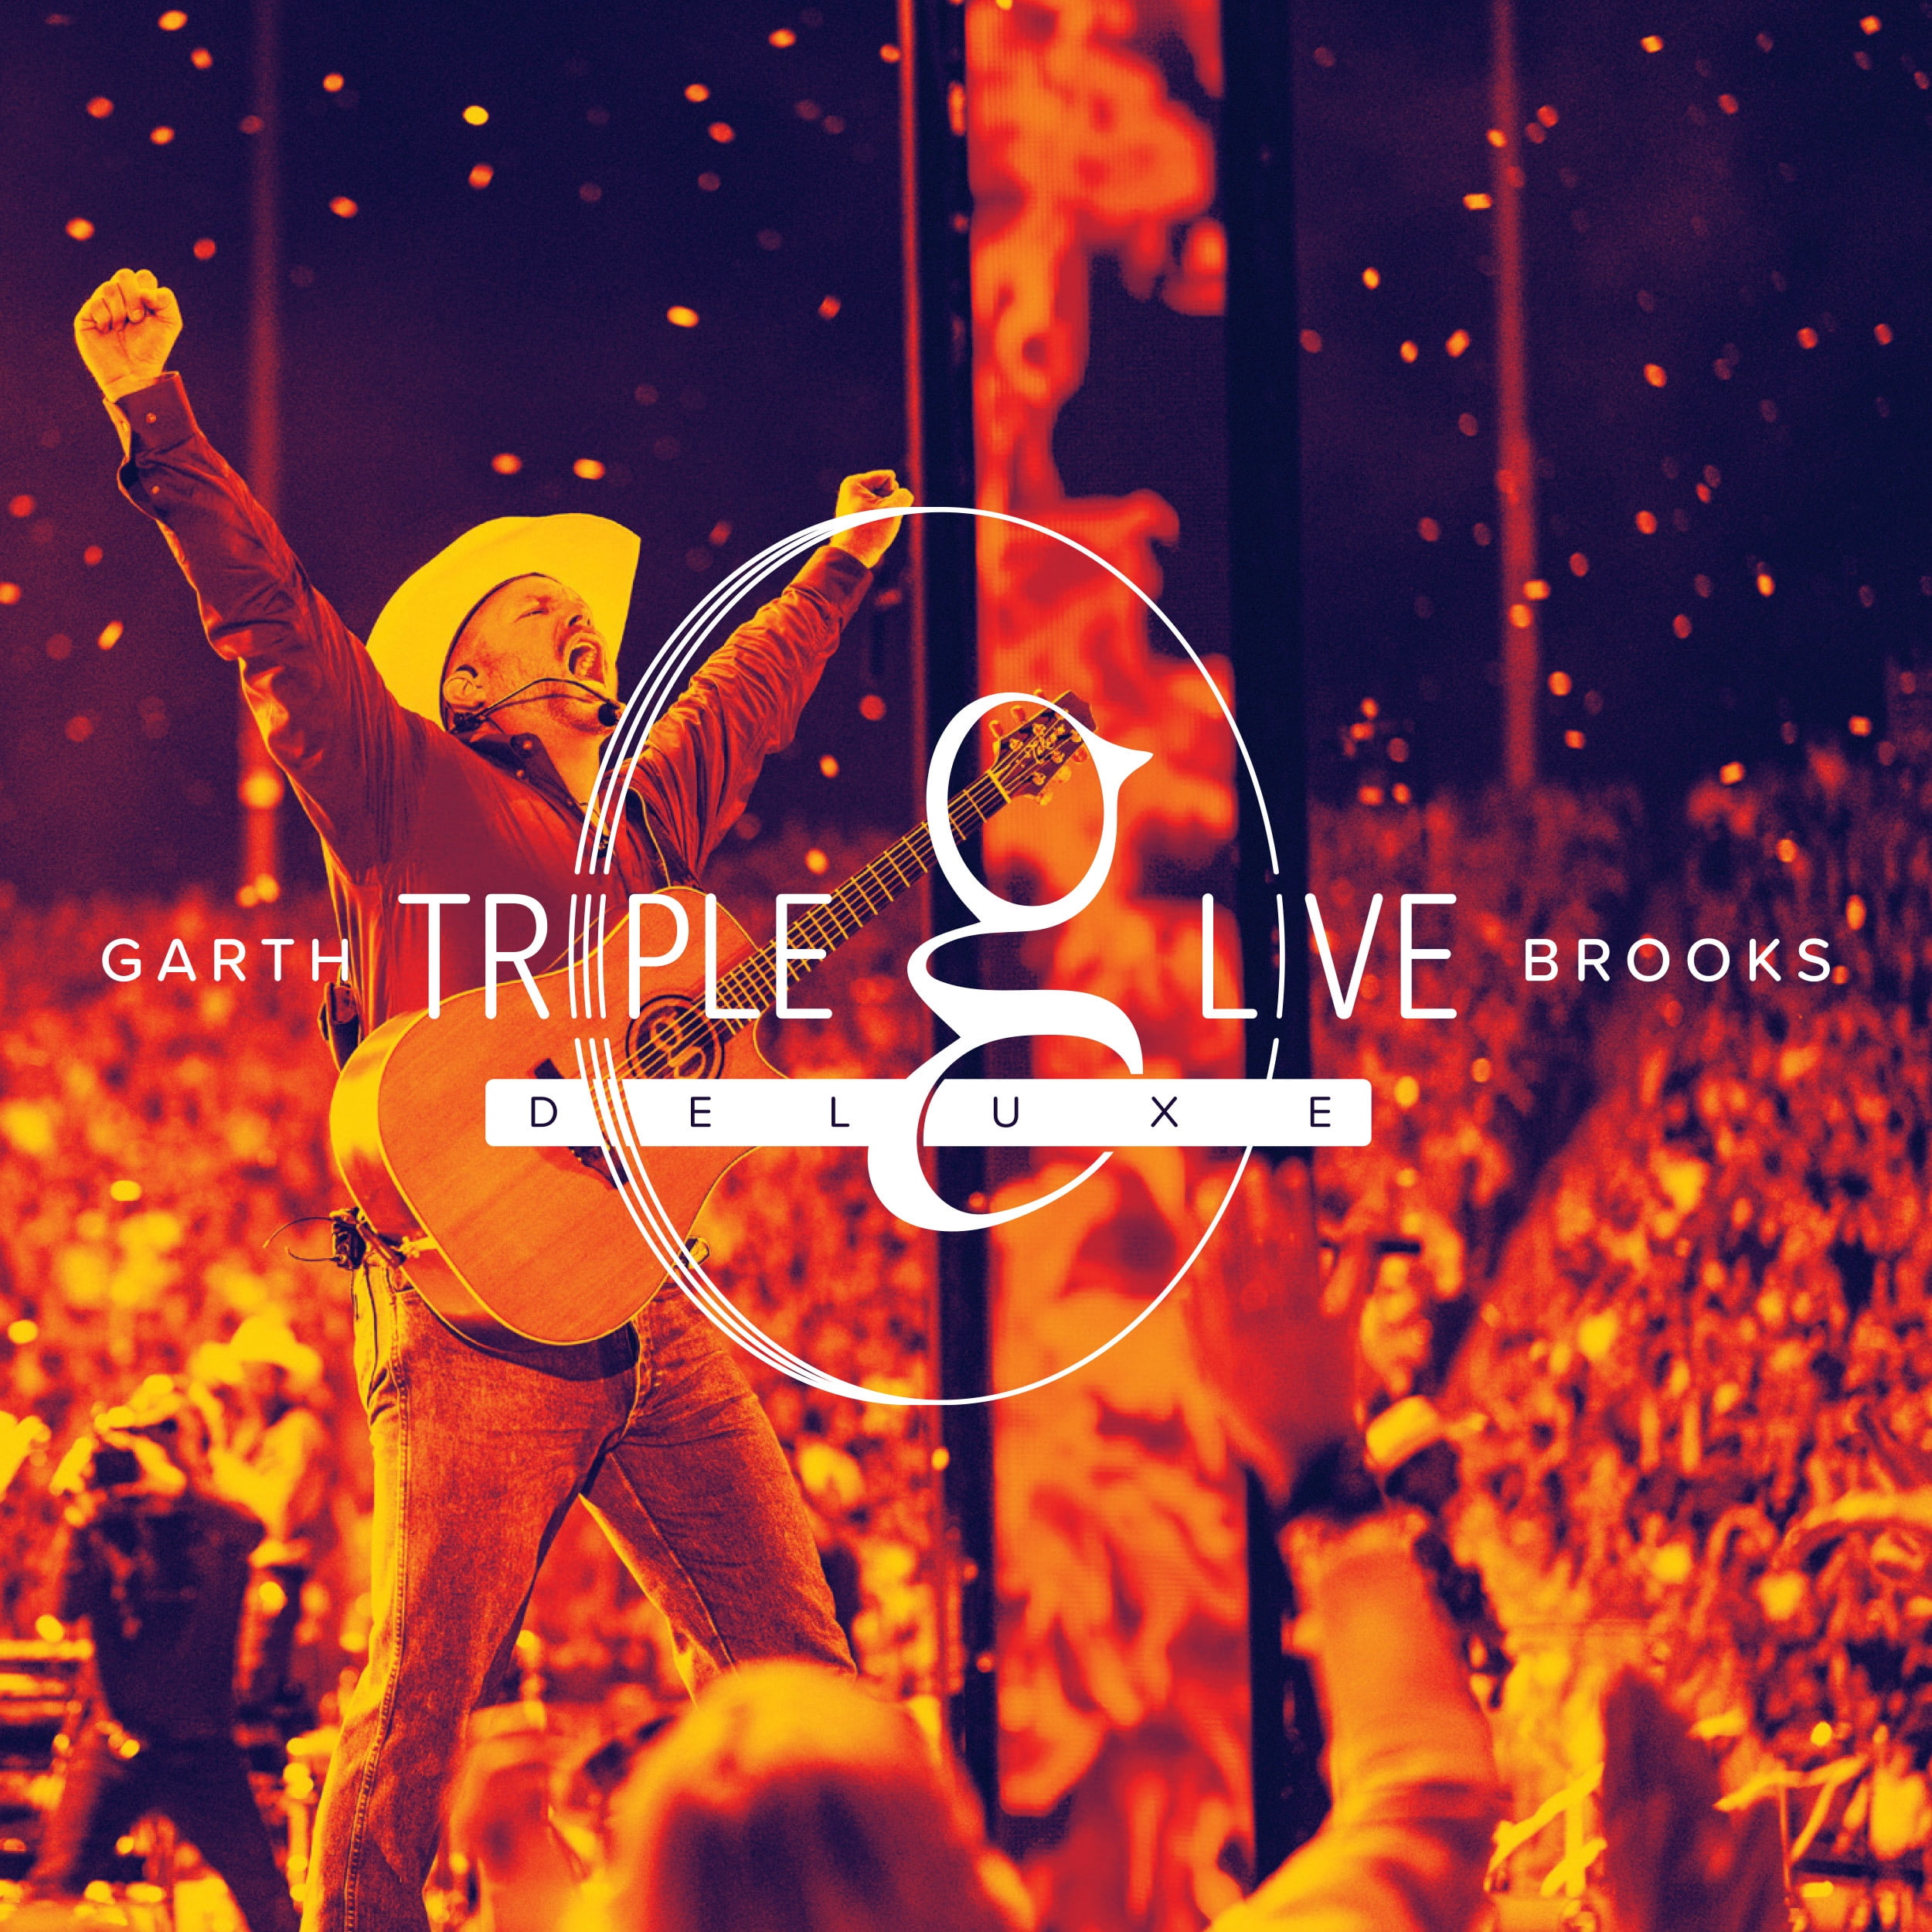 Double Live by Garth Brooks [Music CD]